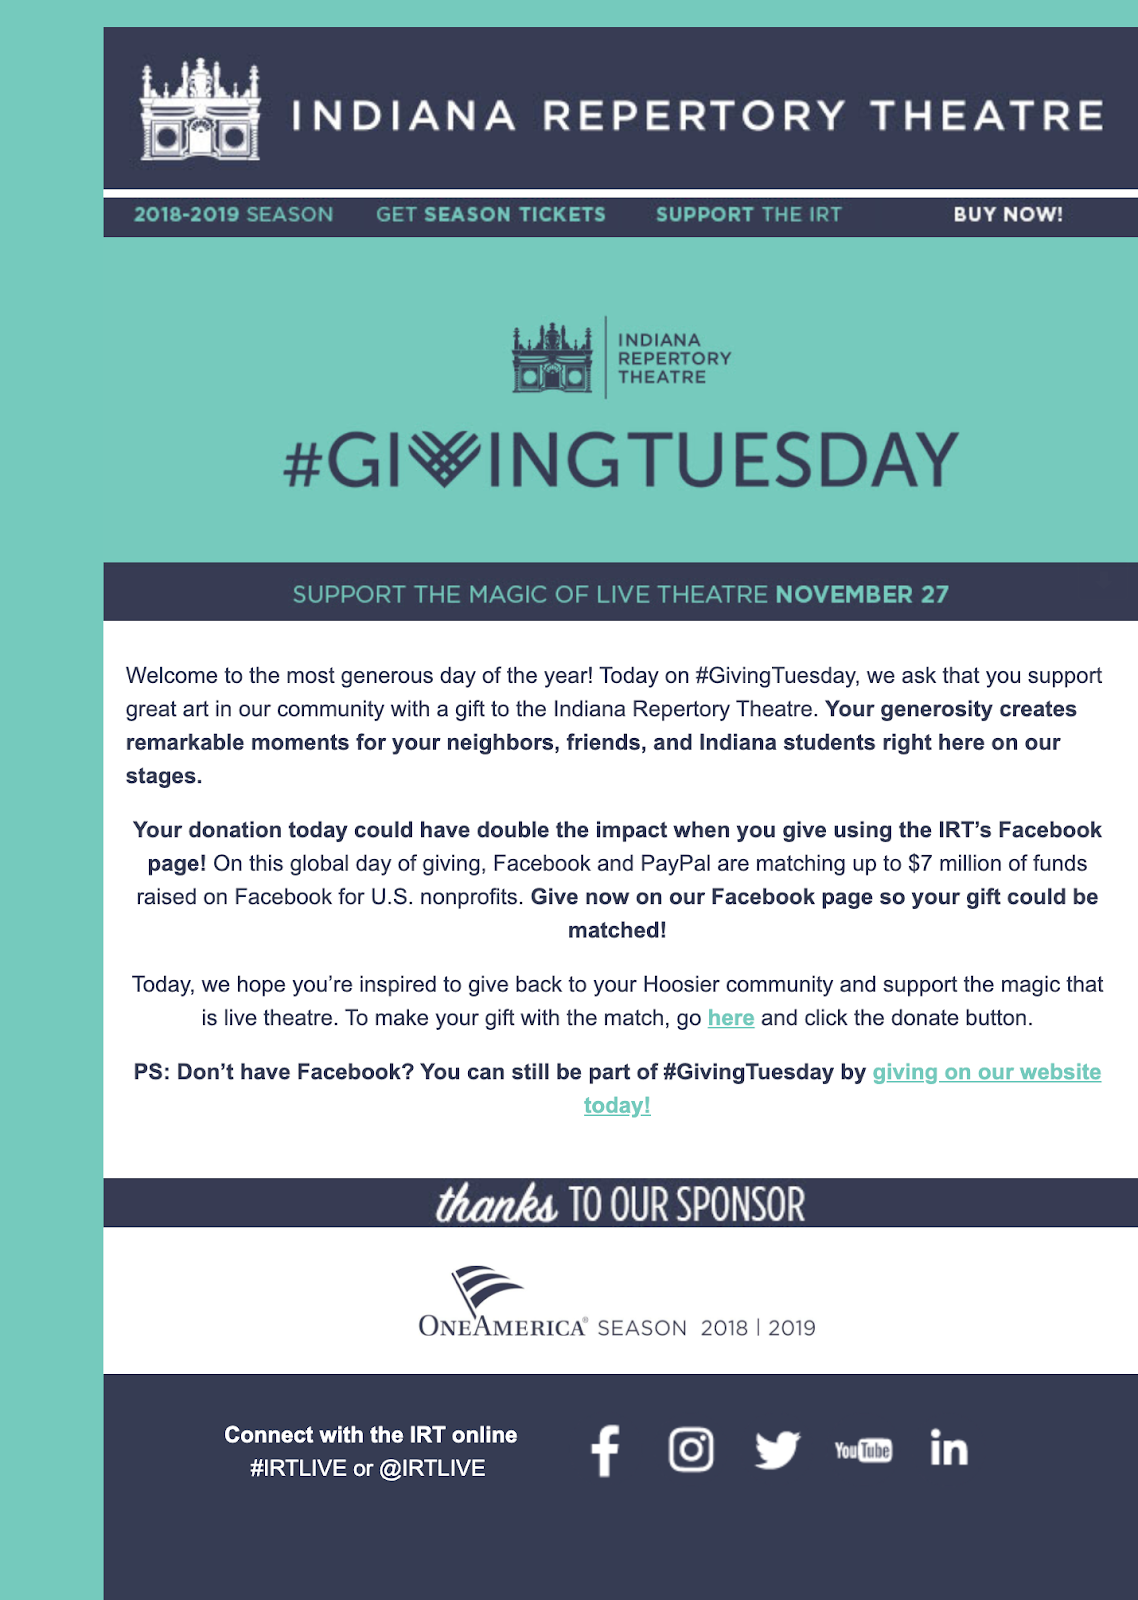 Indiana Repertory Theater giving tuesday email